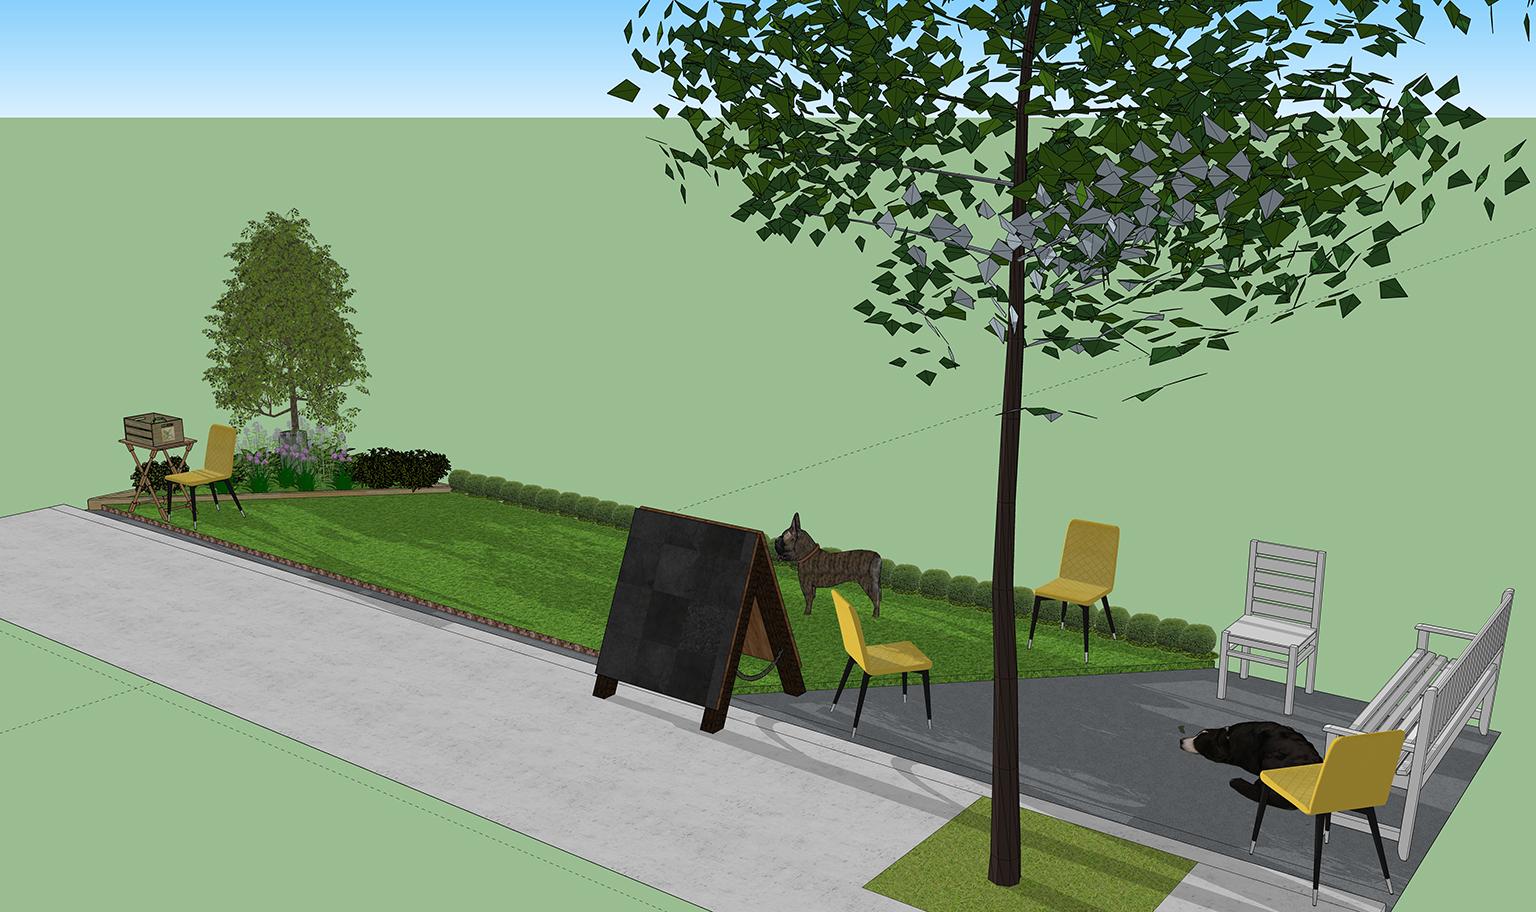 A rendering of the dog-friendly green space planned for two parking spaces in River North on Friday, Sept. 21, as part of PARK(ing) Day. (Courtesy of The Anti-Cruelty Society)